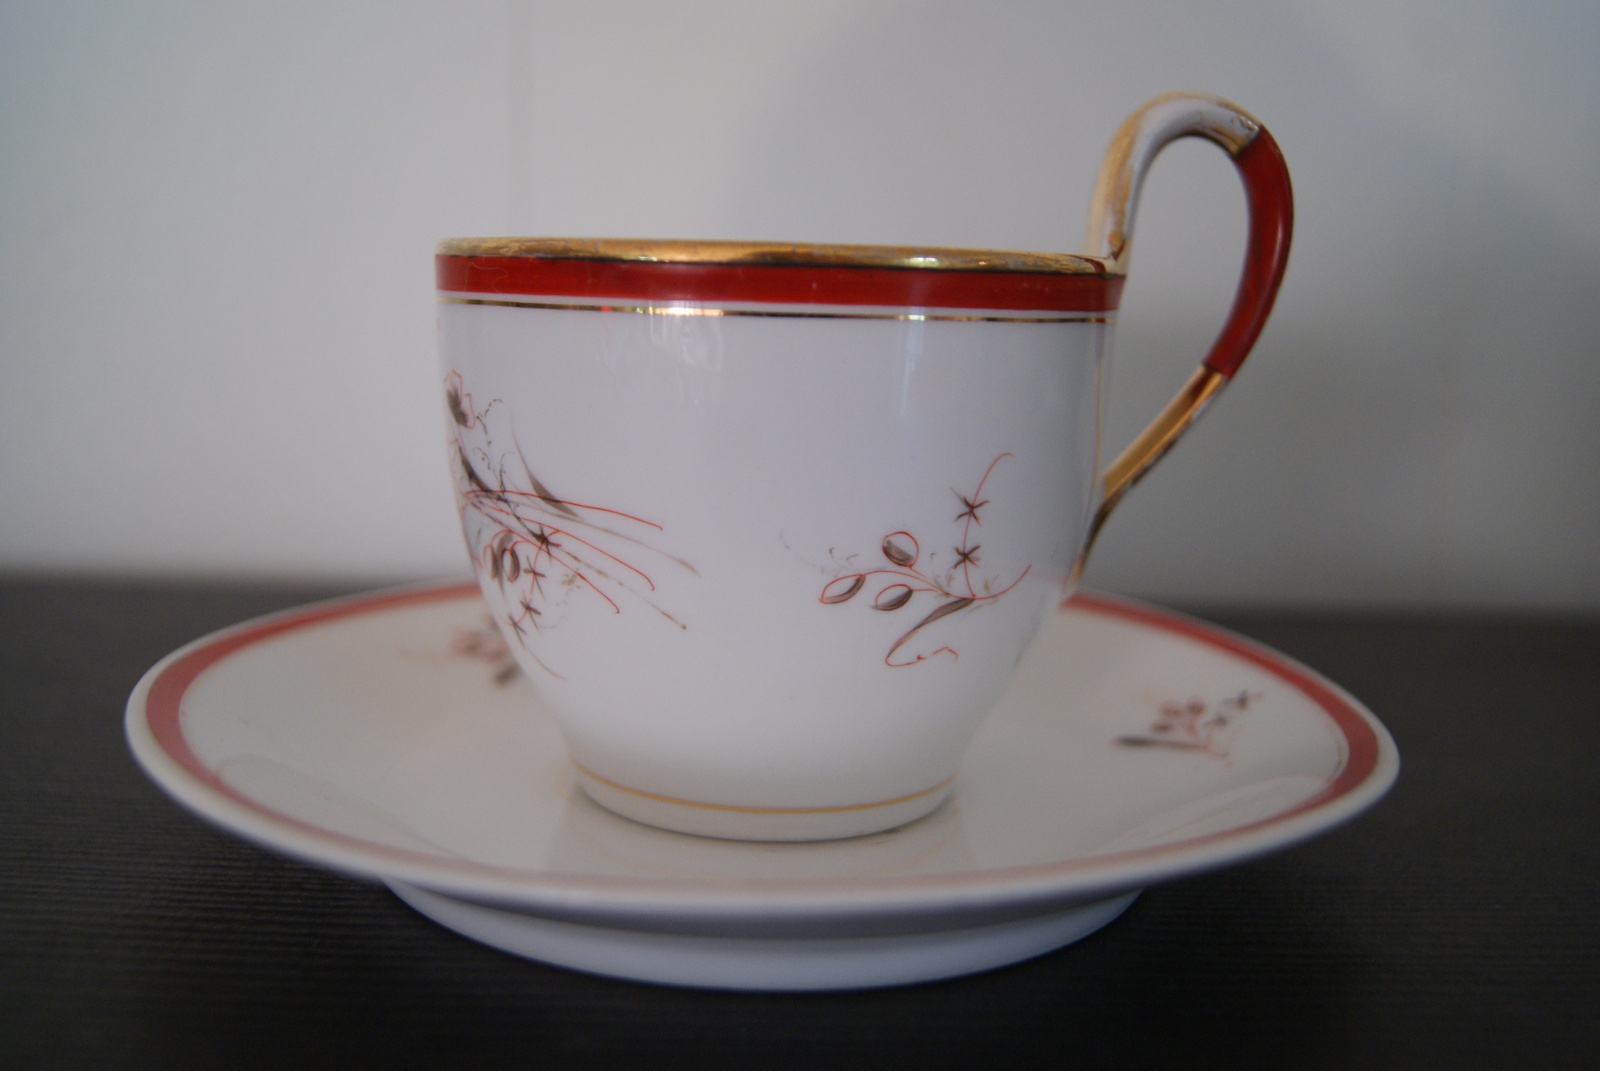 Waldenburg - Altwasser coffee cup with saucer with flowers and leaves